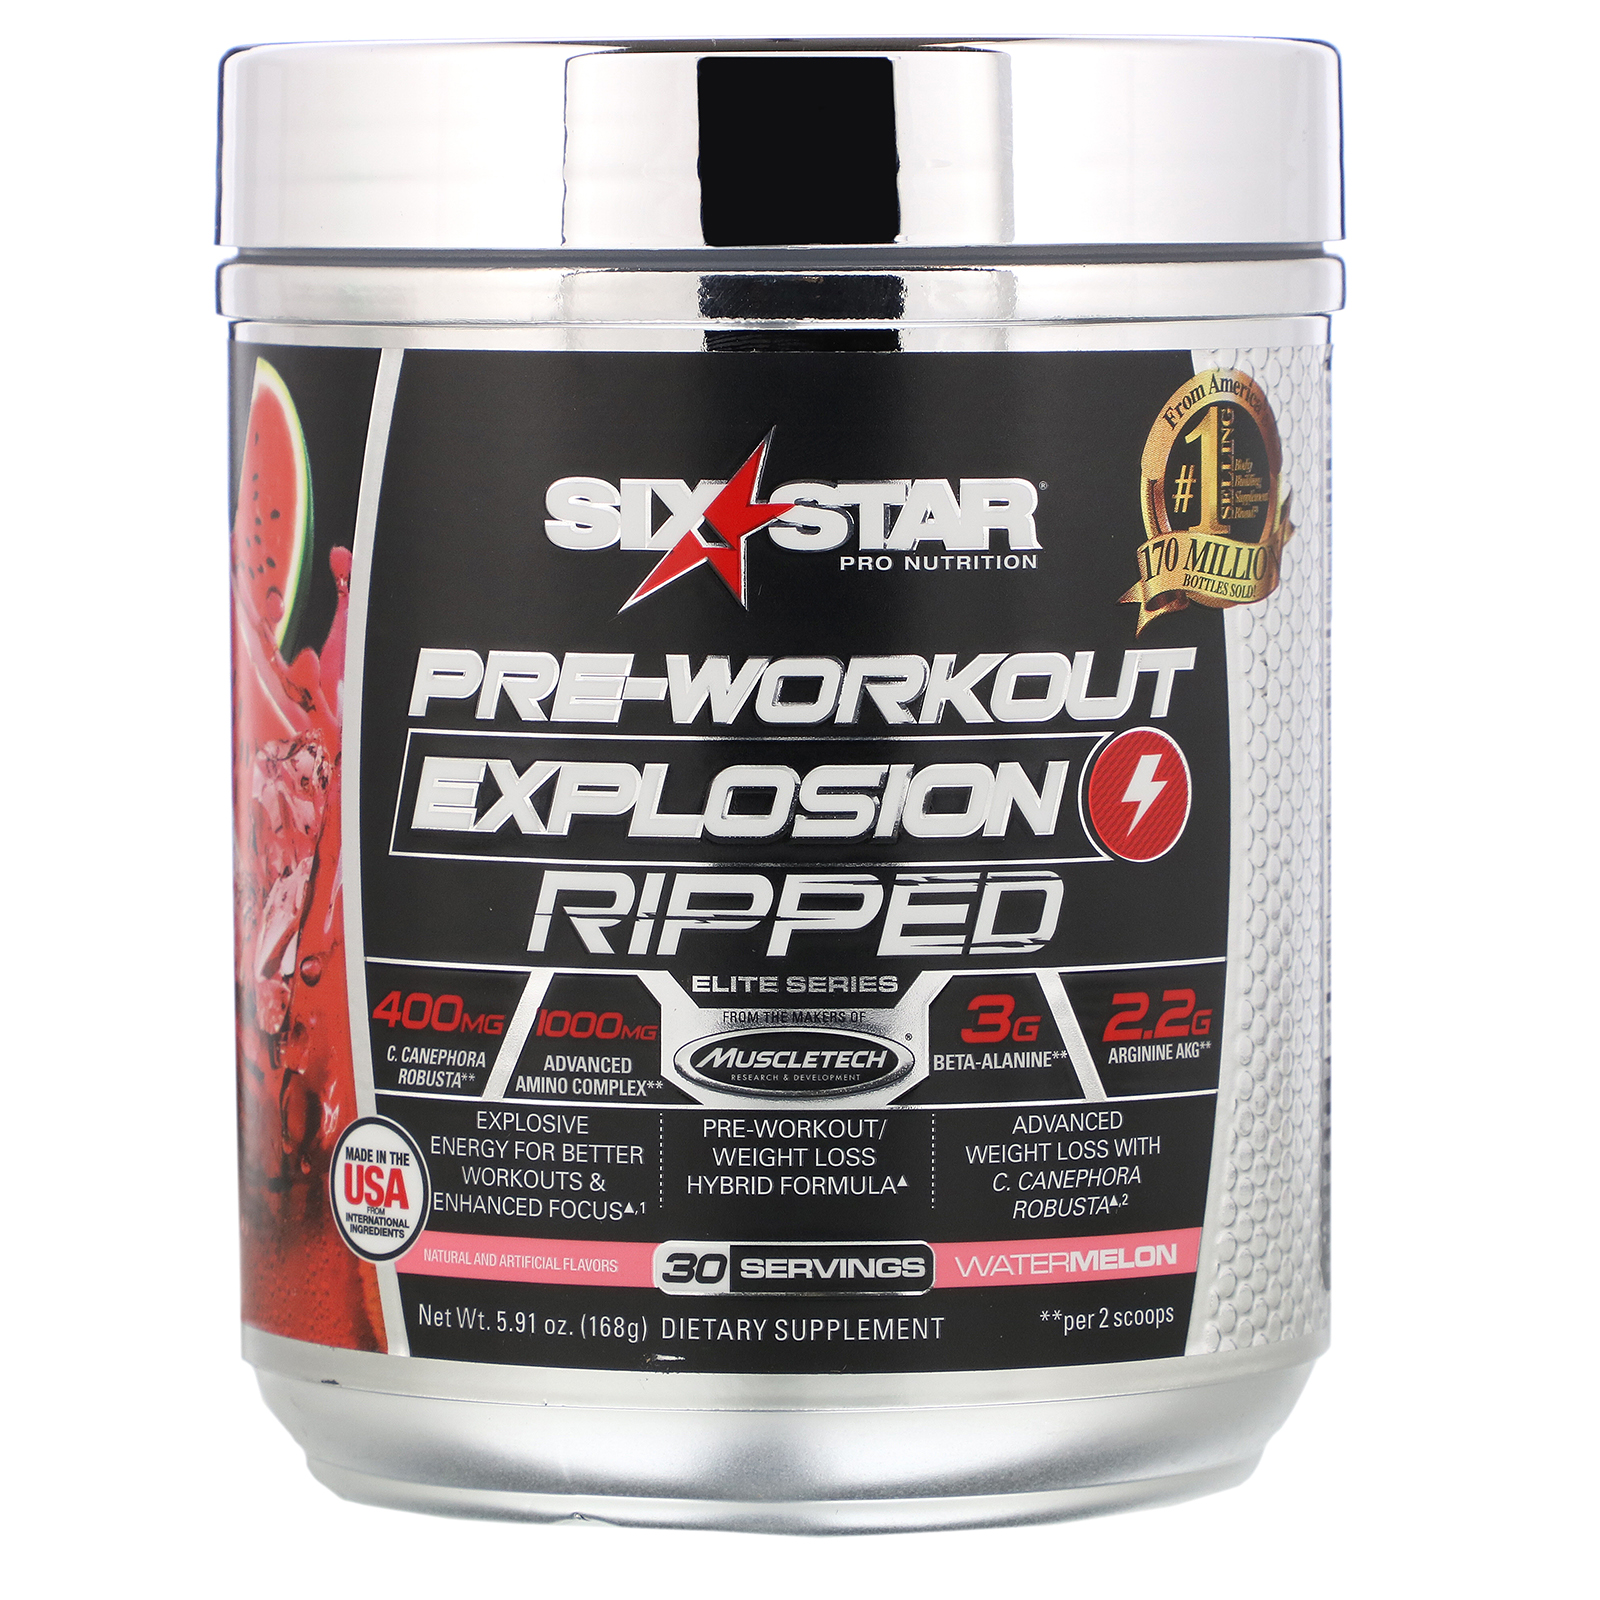 15 Minute Six Star Pre Workout Explosion Ripped Reddit for Weight Loss